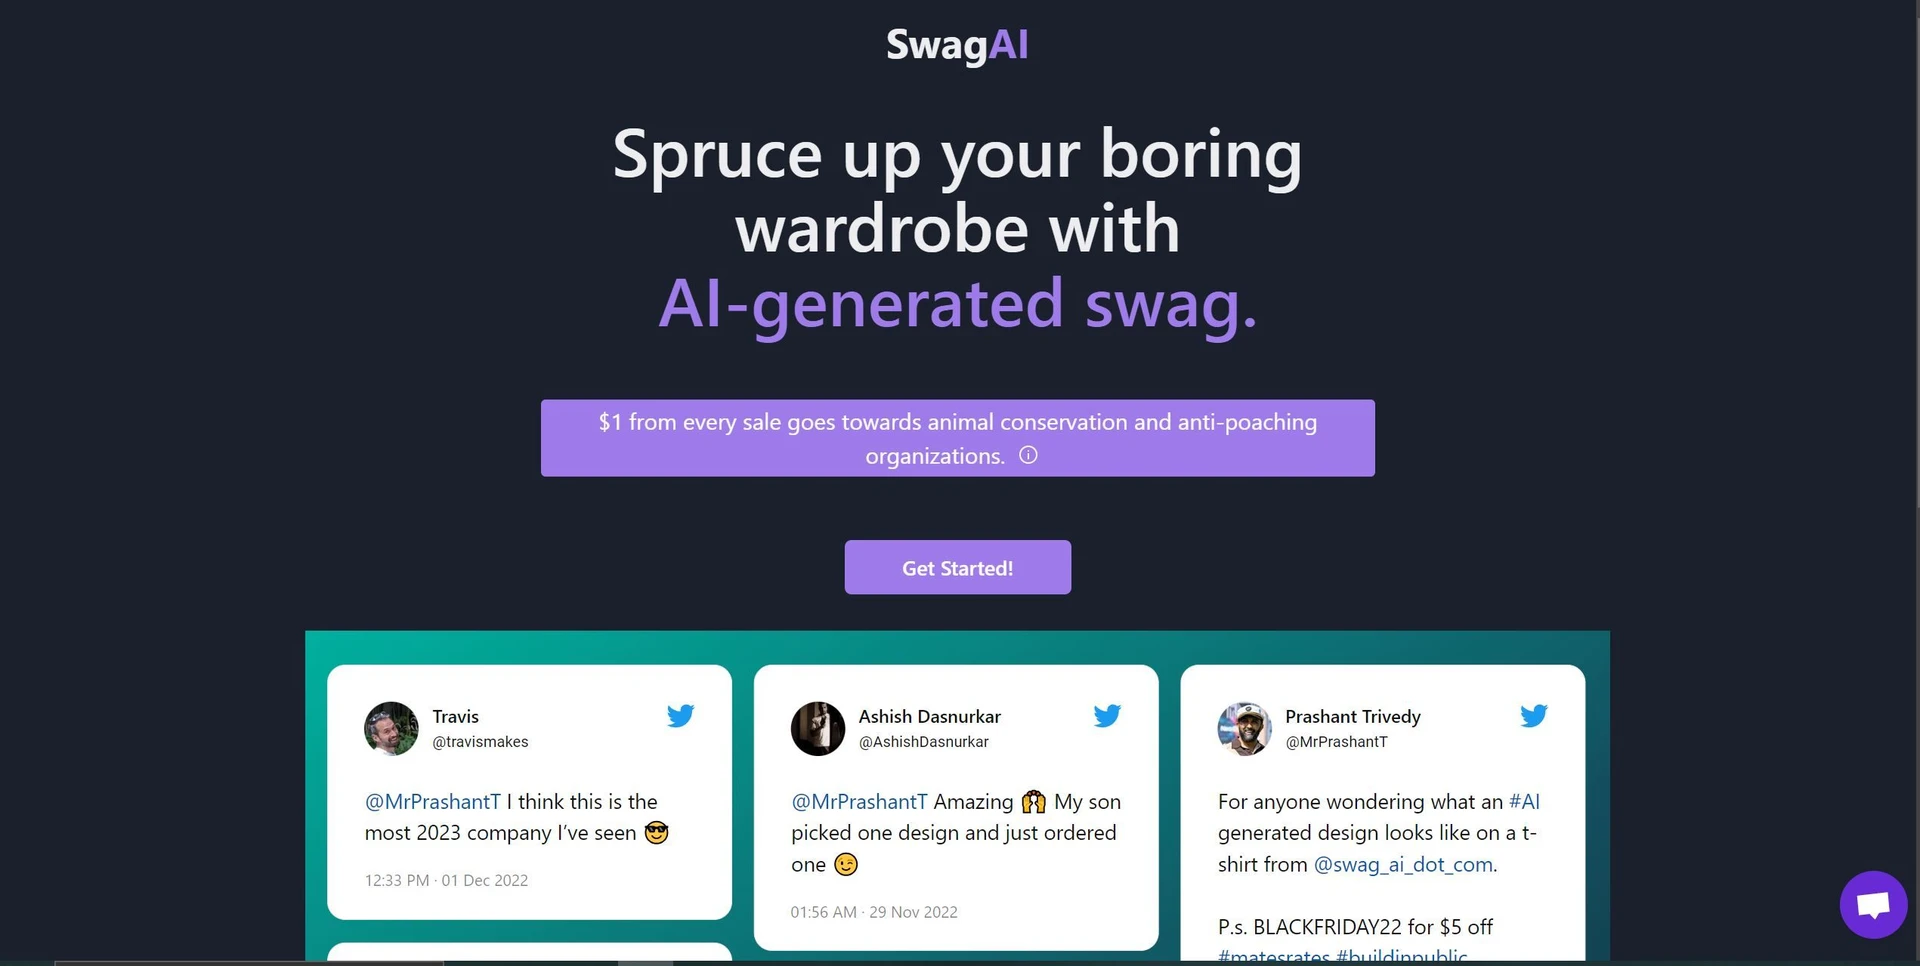 Swag-aiwebsite picture